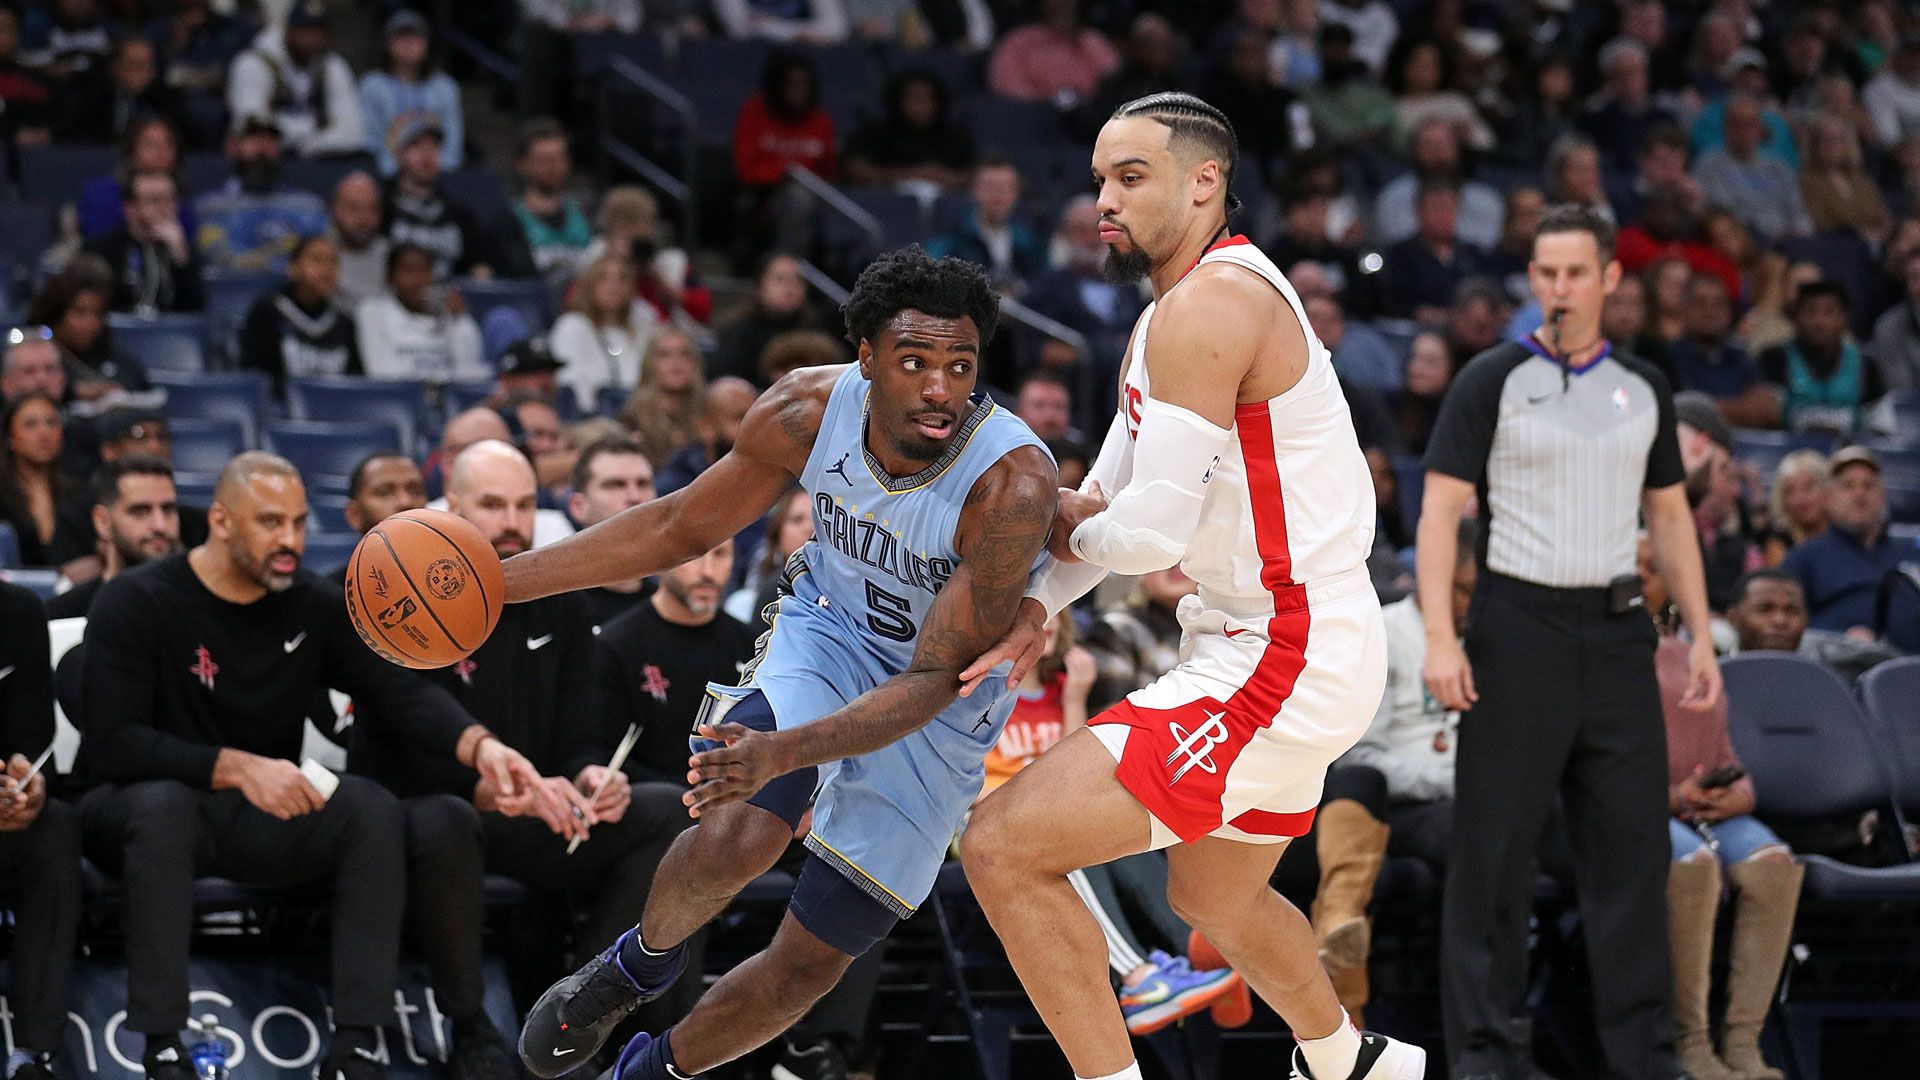 MEMPHIS, TENNESSEE - DECEMBER 15: Vince Williams Jr. #5 of the Memphis Grizzlies handles the ball against Dillon Brooks #9 of the Houston Rockets during the game at FedExForum on December 15, 2023 in Memphis, Tennessee.